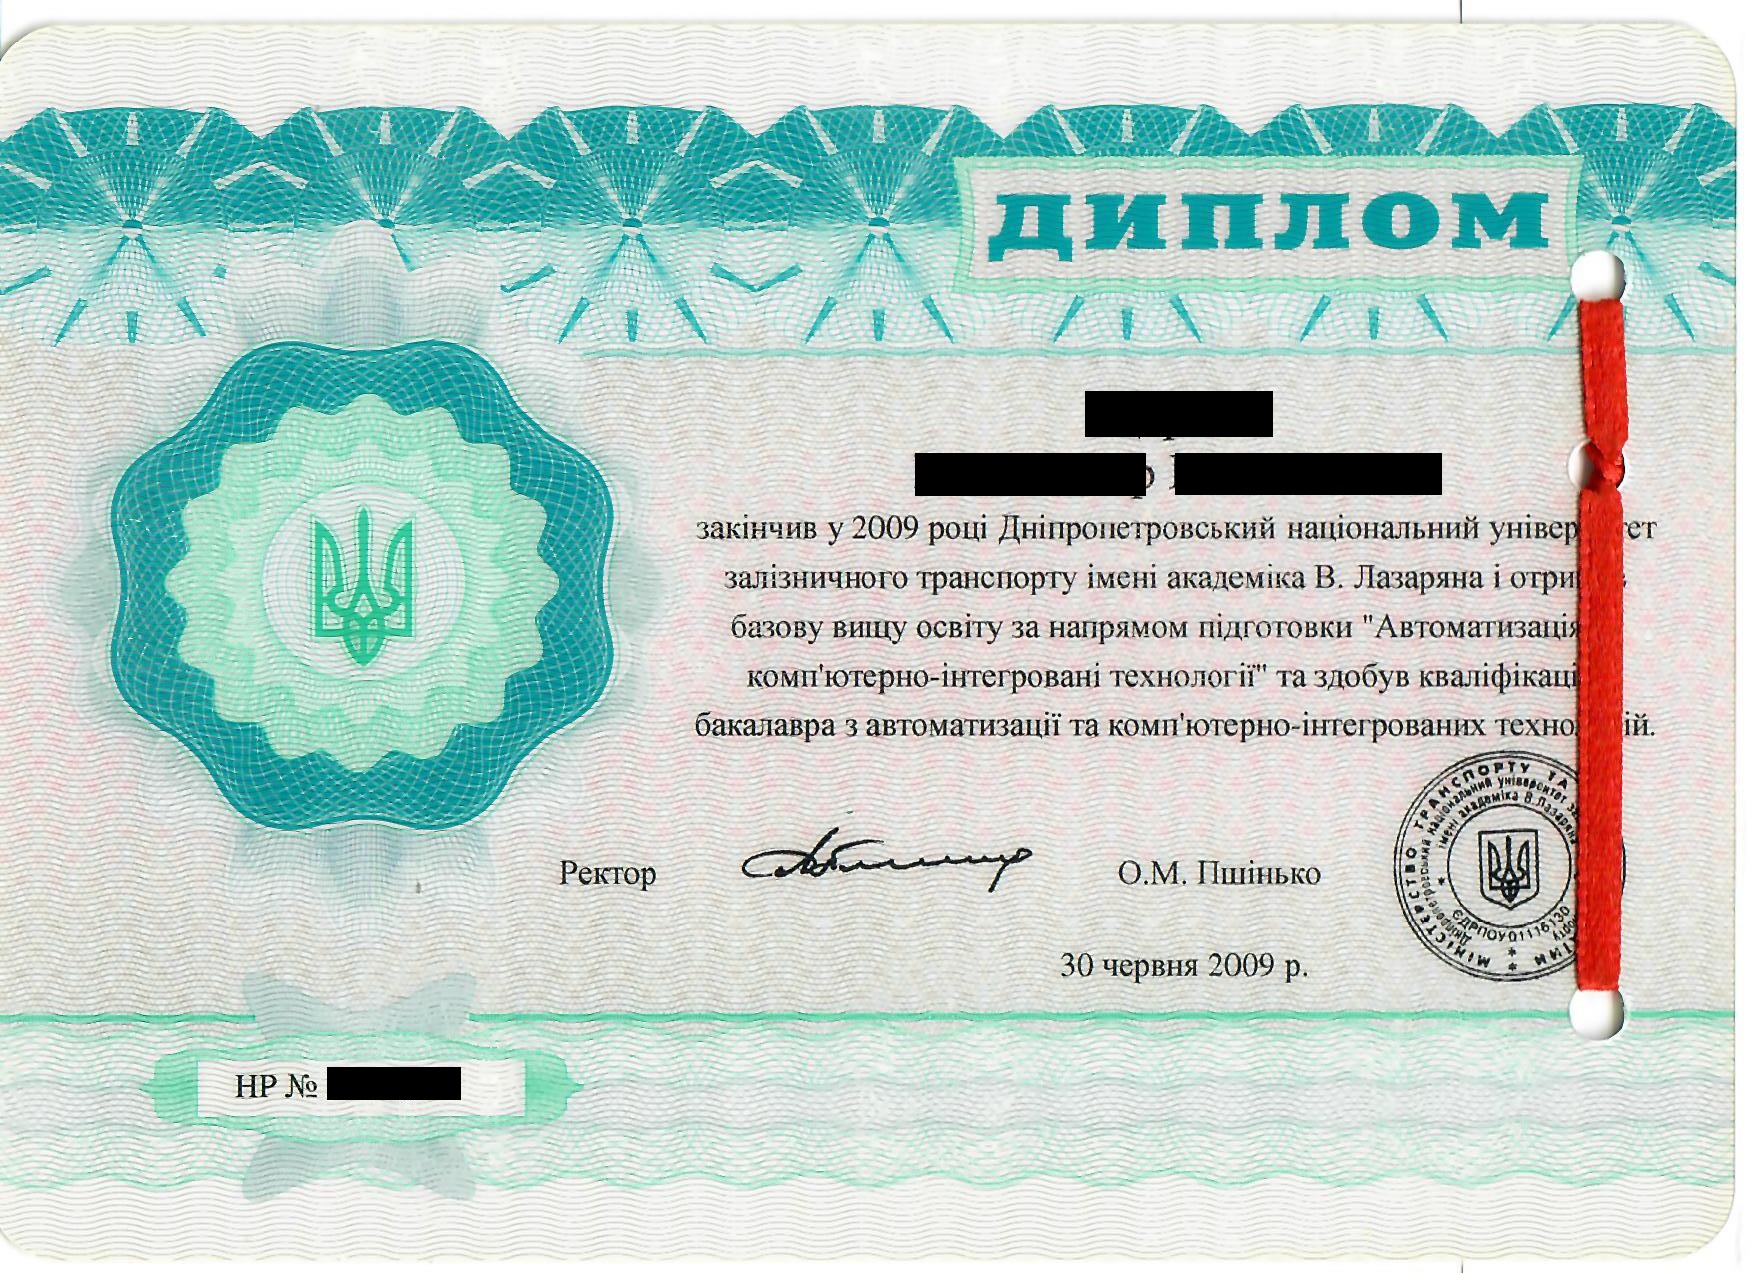 Example of a diploma from Ukraine